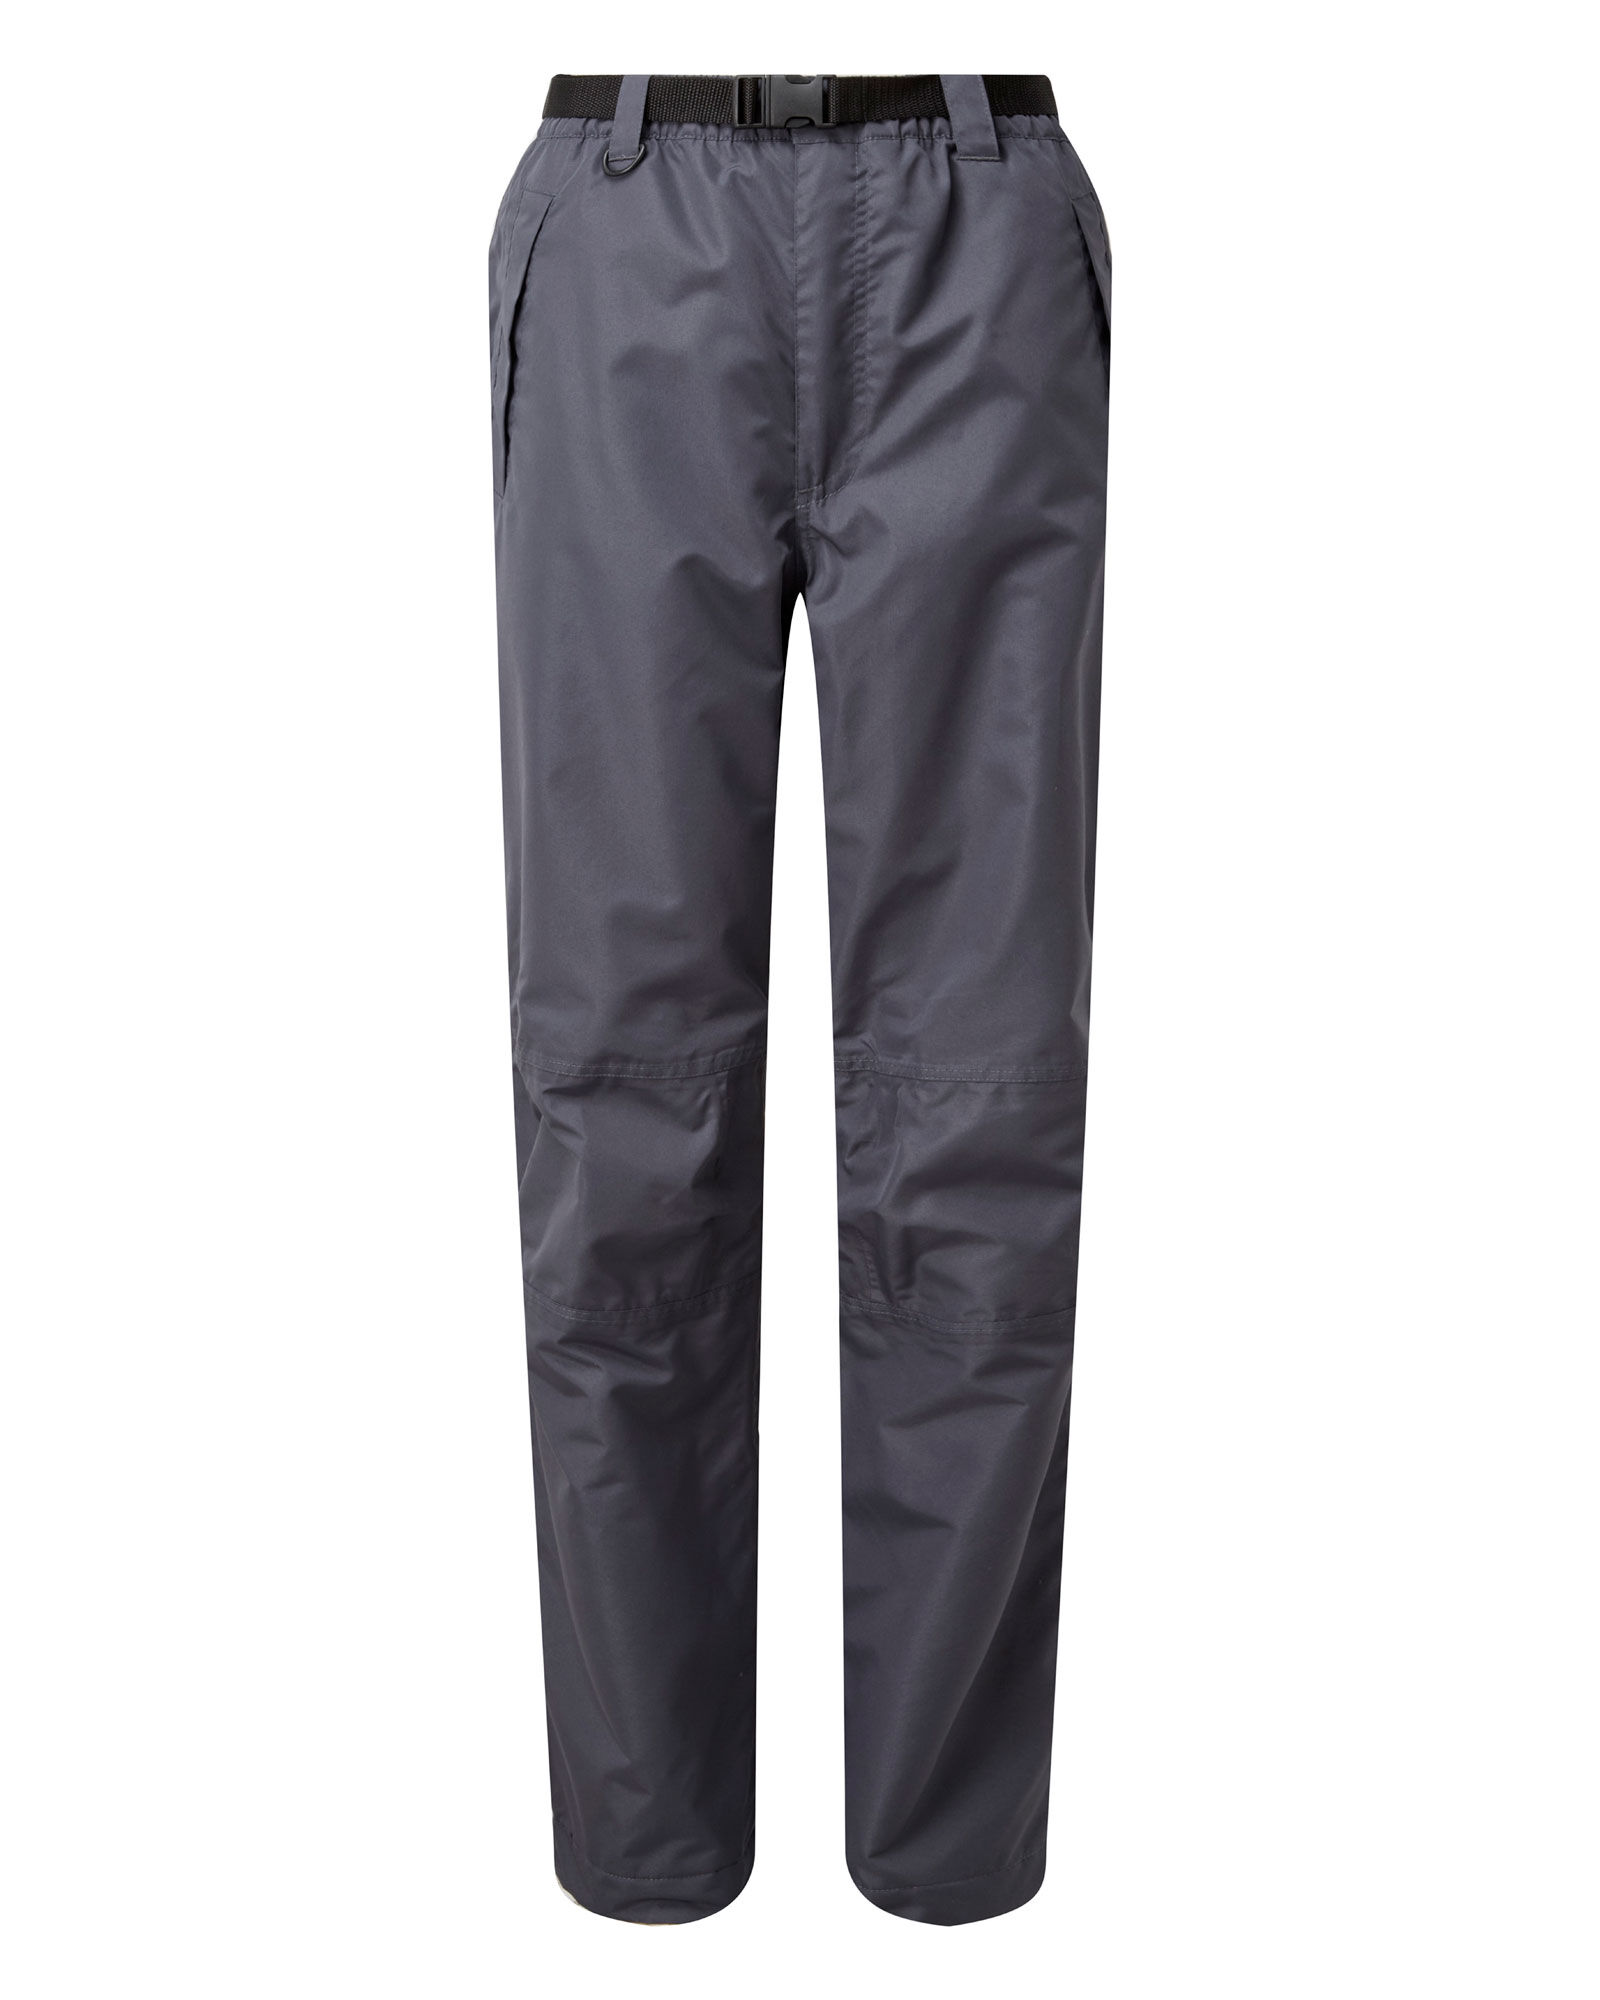 lined ladies trousers